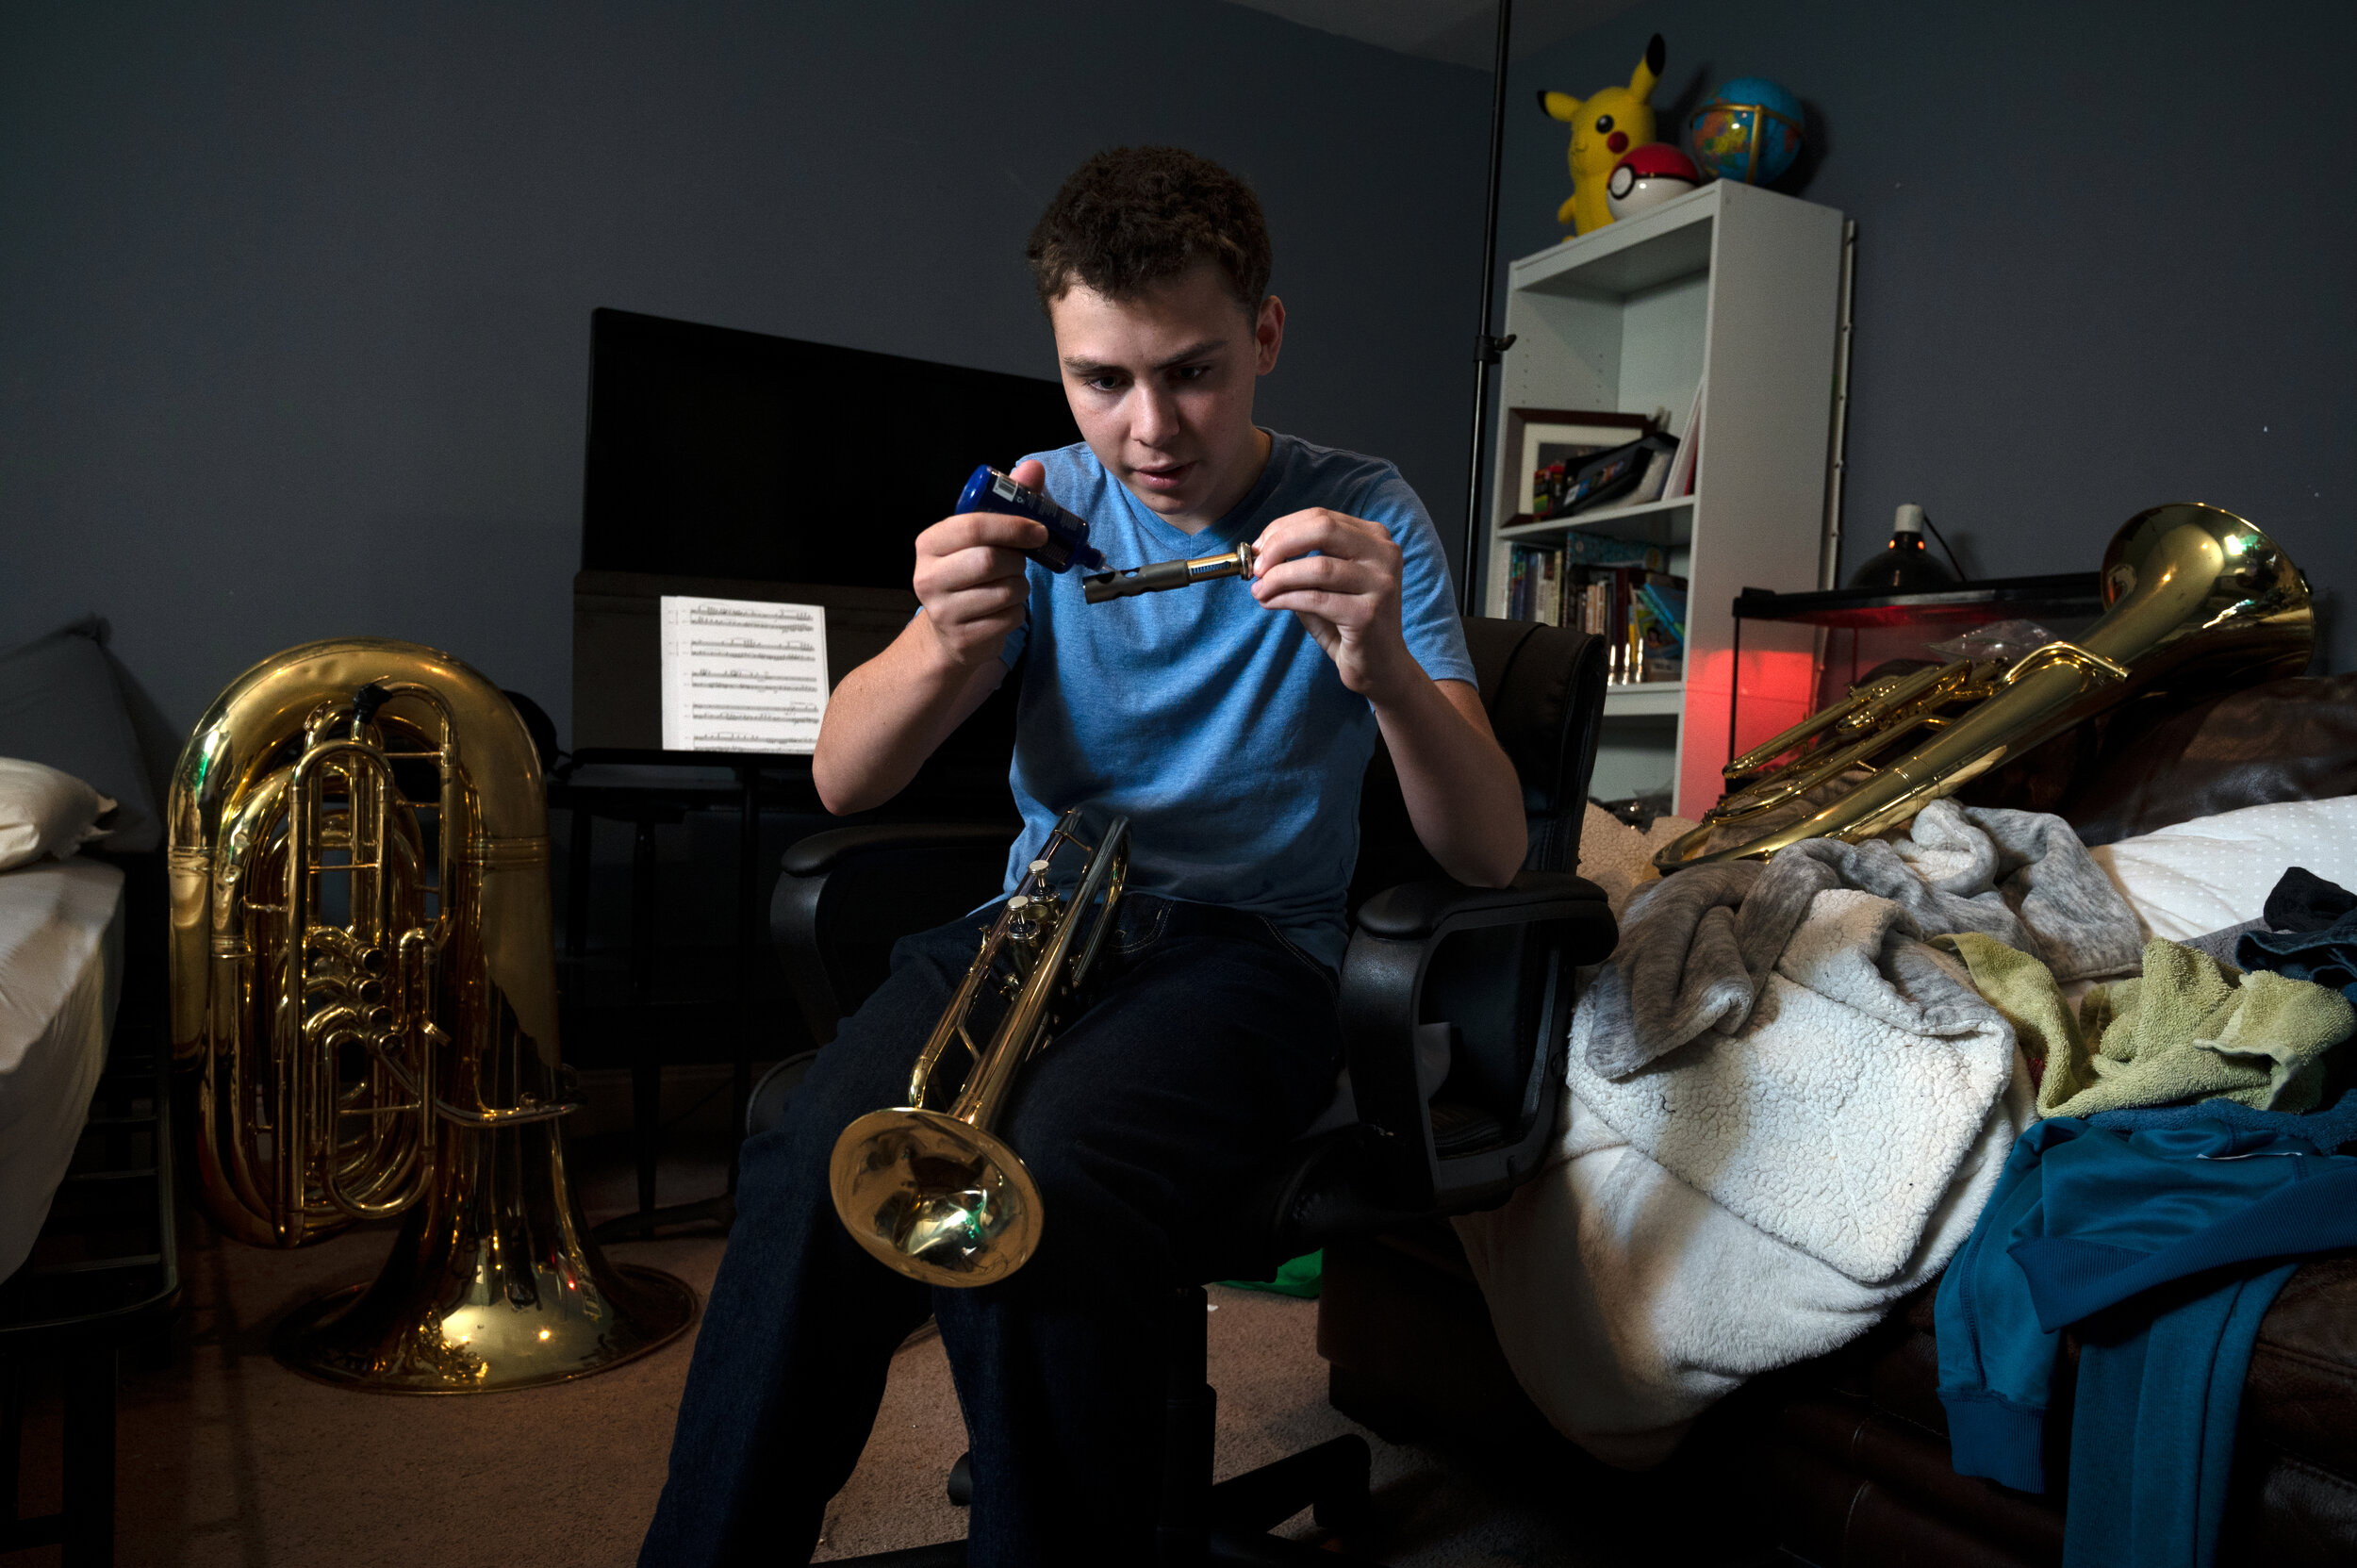  Wesley has loved playing brass instruments since he first began four years ago. Pursuing his musical inclinations has been a driving force for him to attend public school for a full school year because he plans on making a career in the music indust